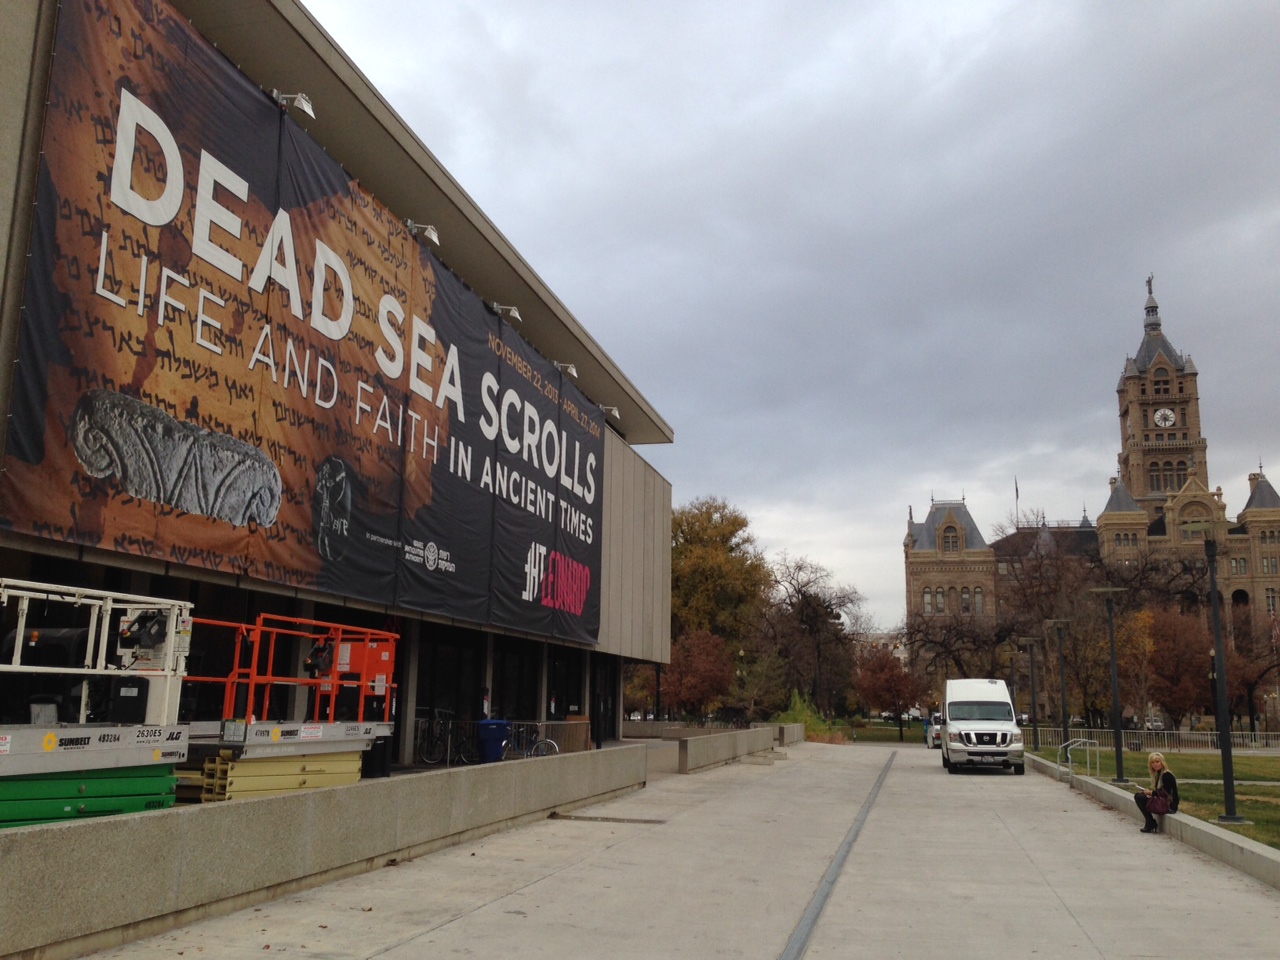 An exhibition of Dead Sea scrolls and other artifacts is advertised on a banner draping The Leonardo in Salt Lake City.